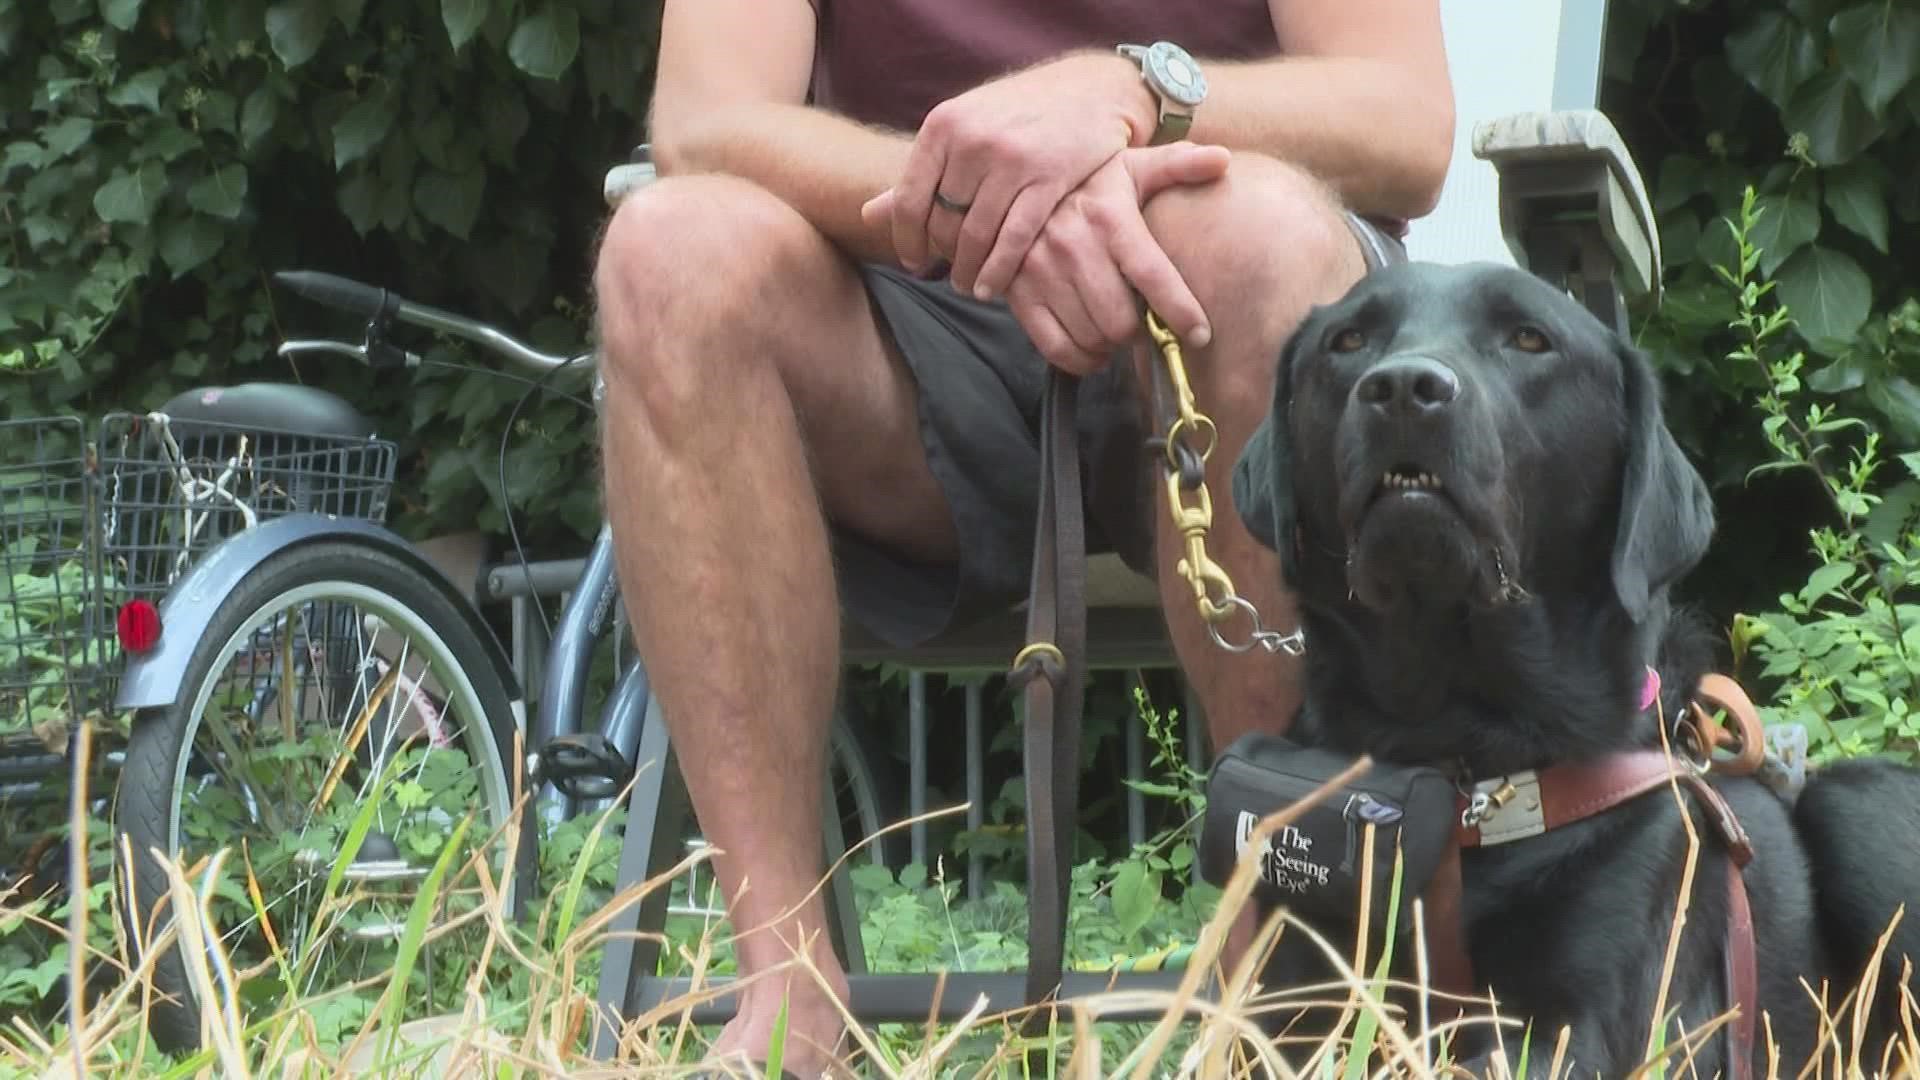 Two Mainers who use service animals say some Uber drivers are refusing to pick them up because of their guide dogs.